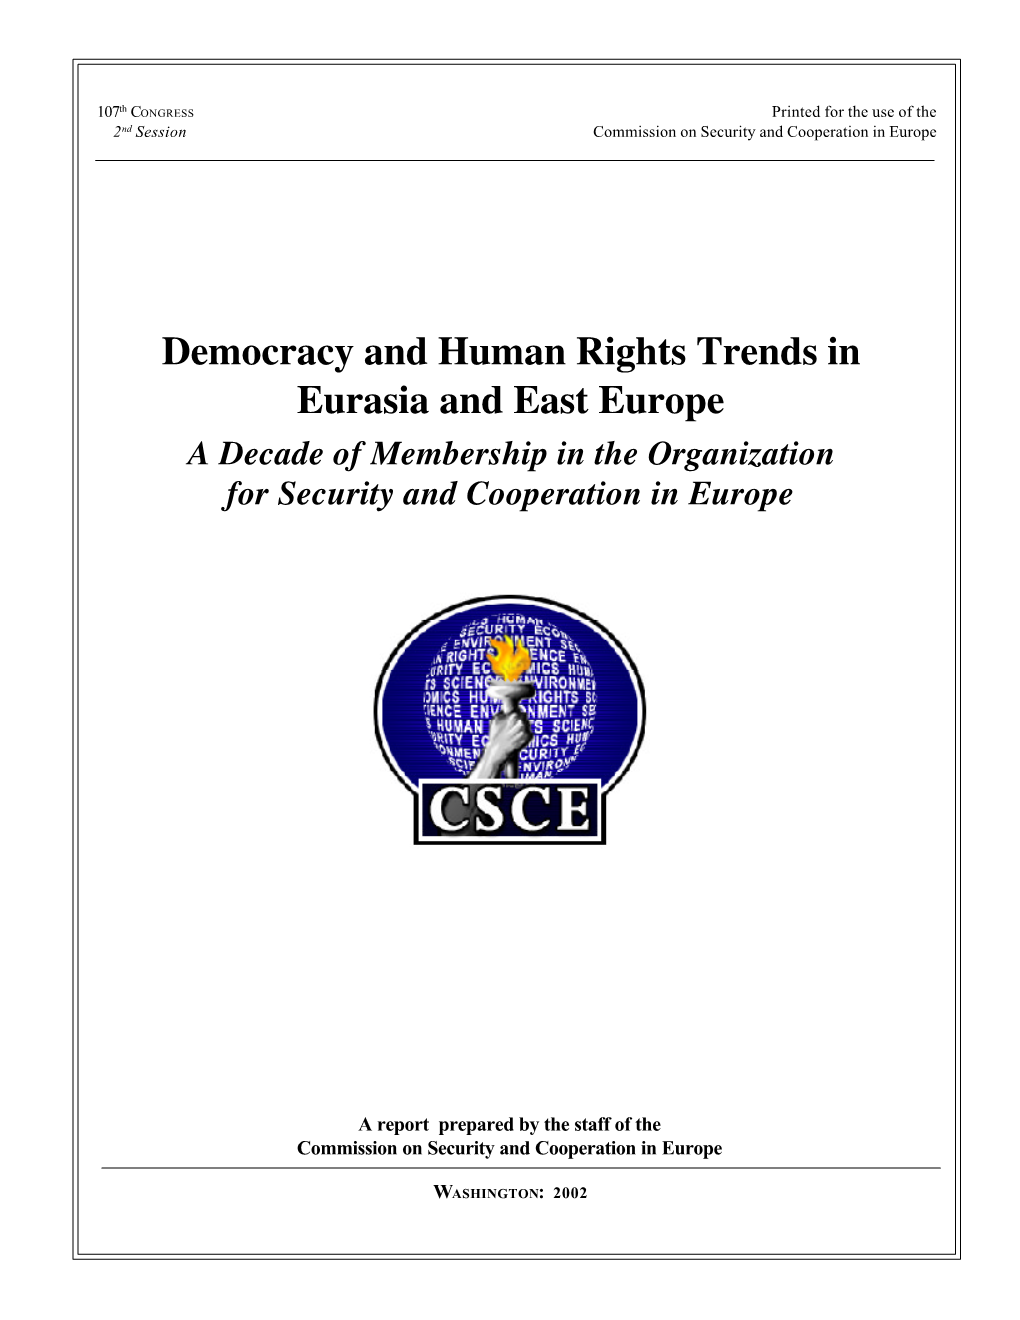 Democracy and Human Rights Trends in Eurasia and East Europe a Decade of Membership in the Organization for Security and Cooperation in Europe